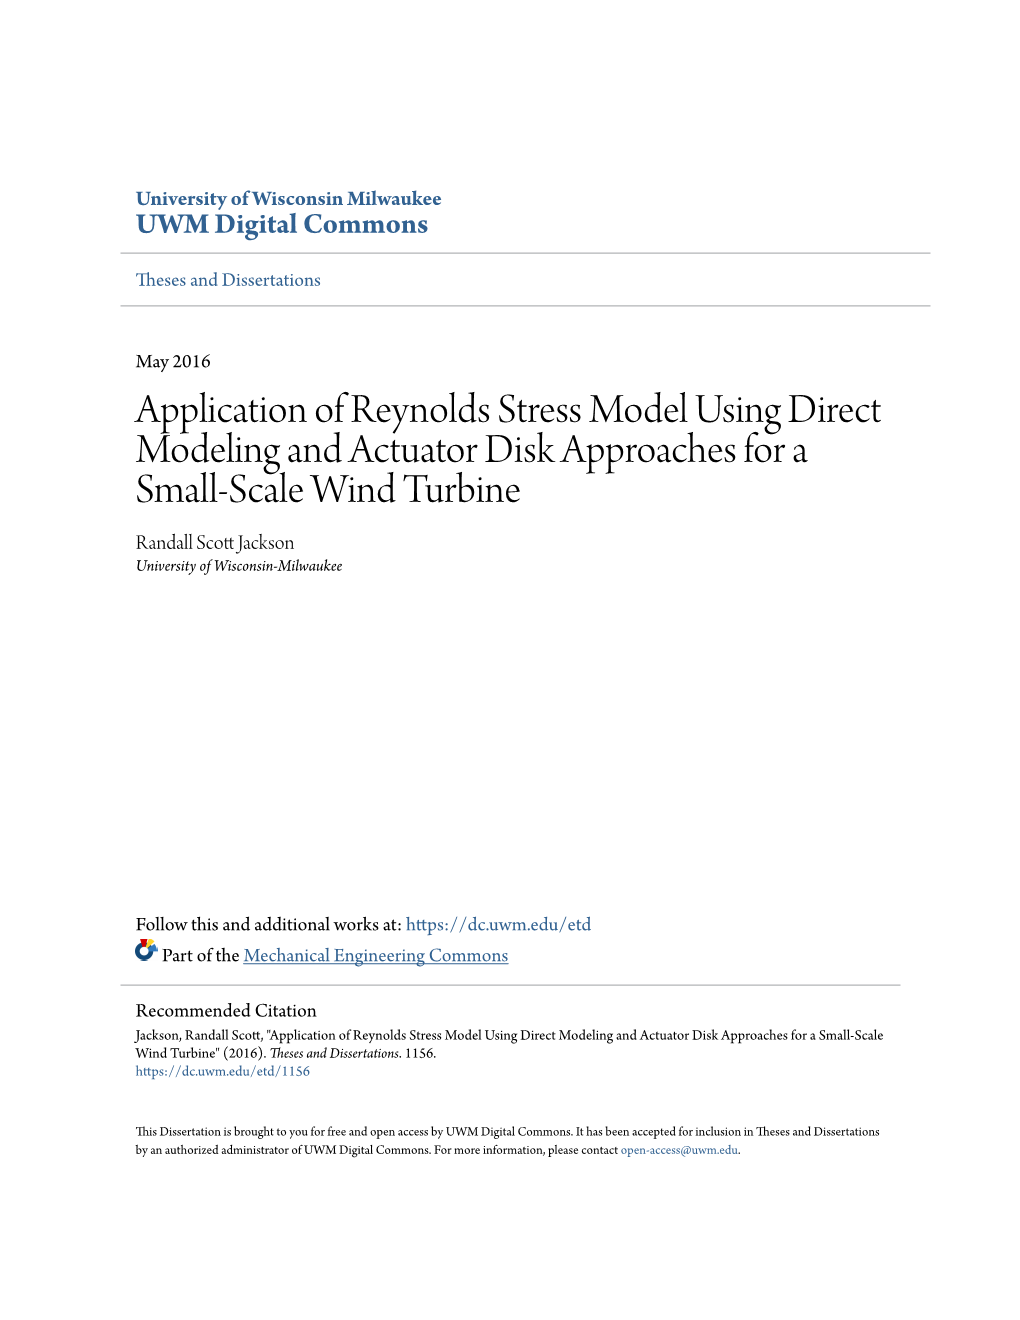 Application of Reynolds Stress Model Using Direct Modeling and Actuator